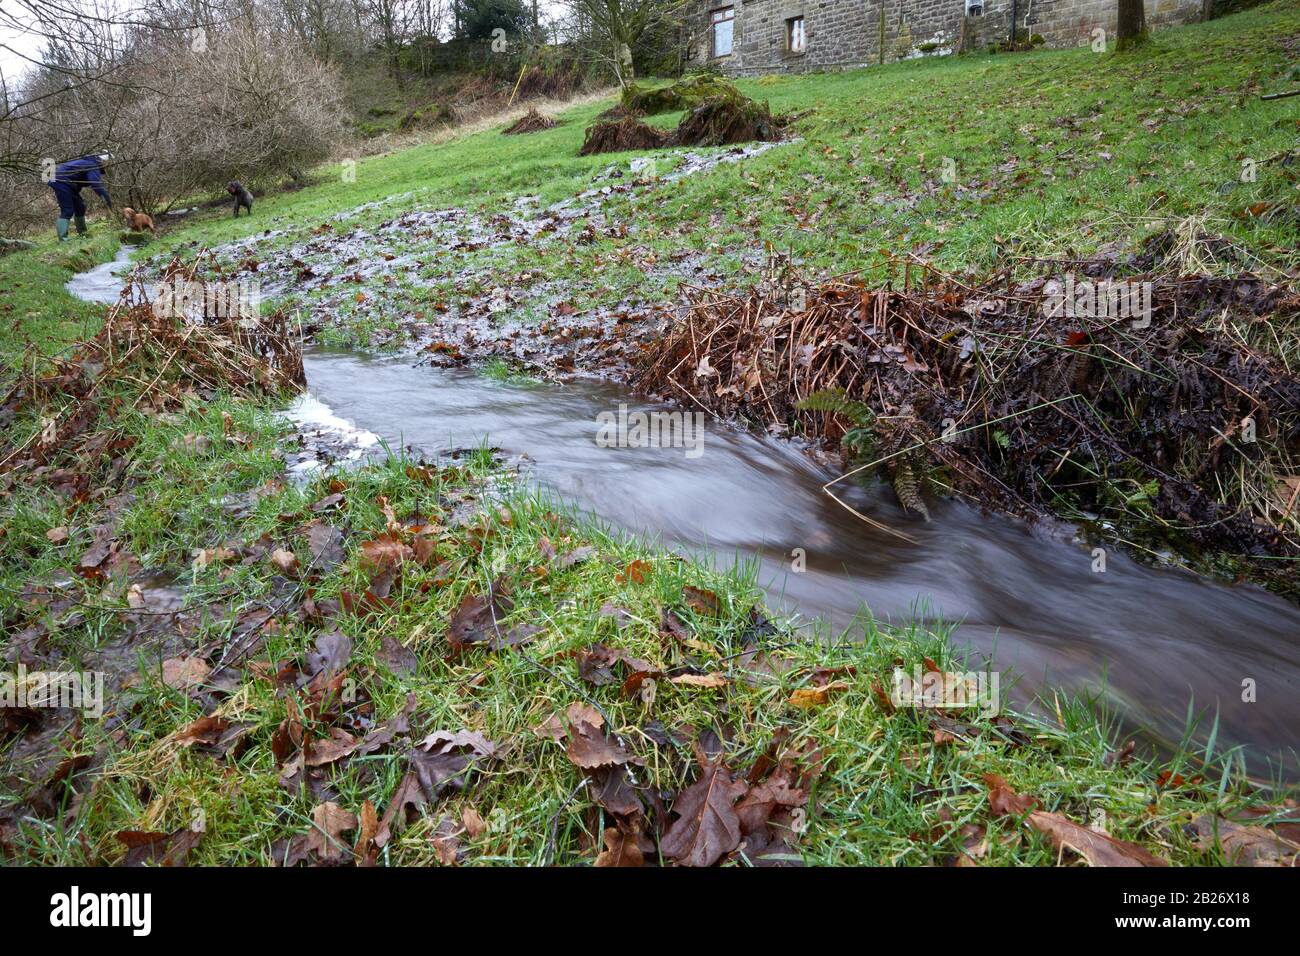 Bewerley, Harrogate, North Yorkshire, England, UK. 16/02/20. After the heavy and persistent rain from storm Dennis, long dormant springs begin to rise Stock Photo